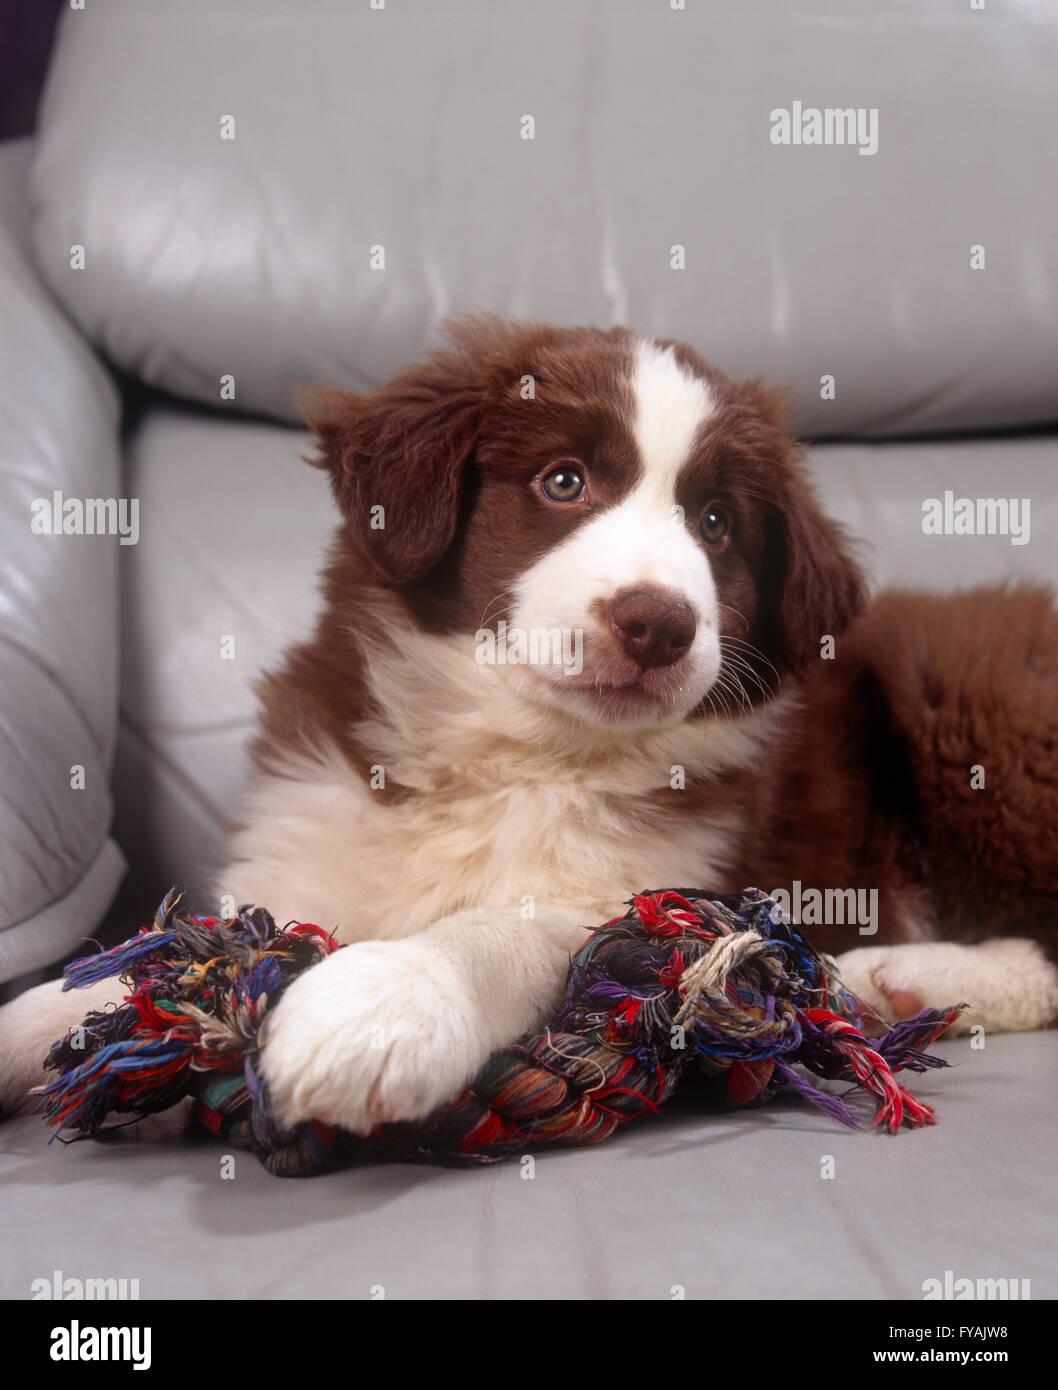 Border Collie puppy sitting on a grey sofa, holding its chew toy, indoors. Stock Photo